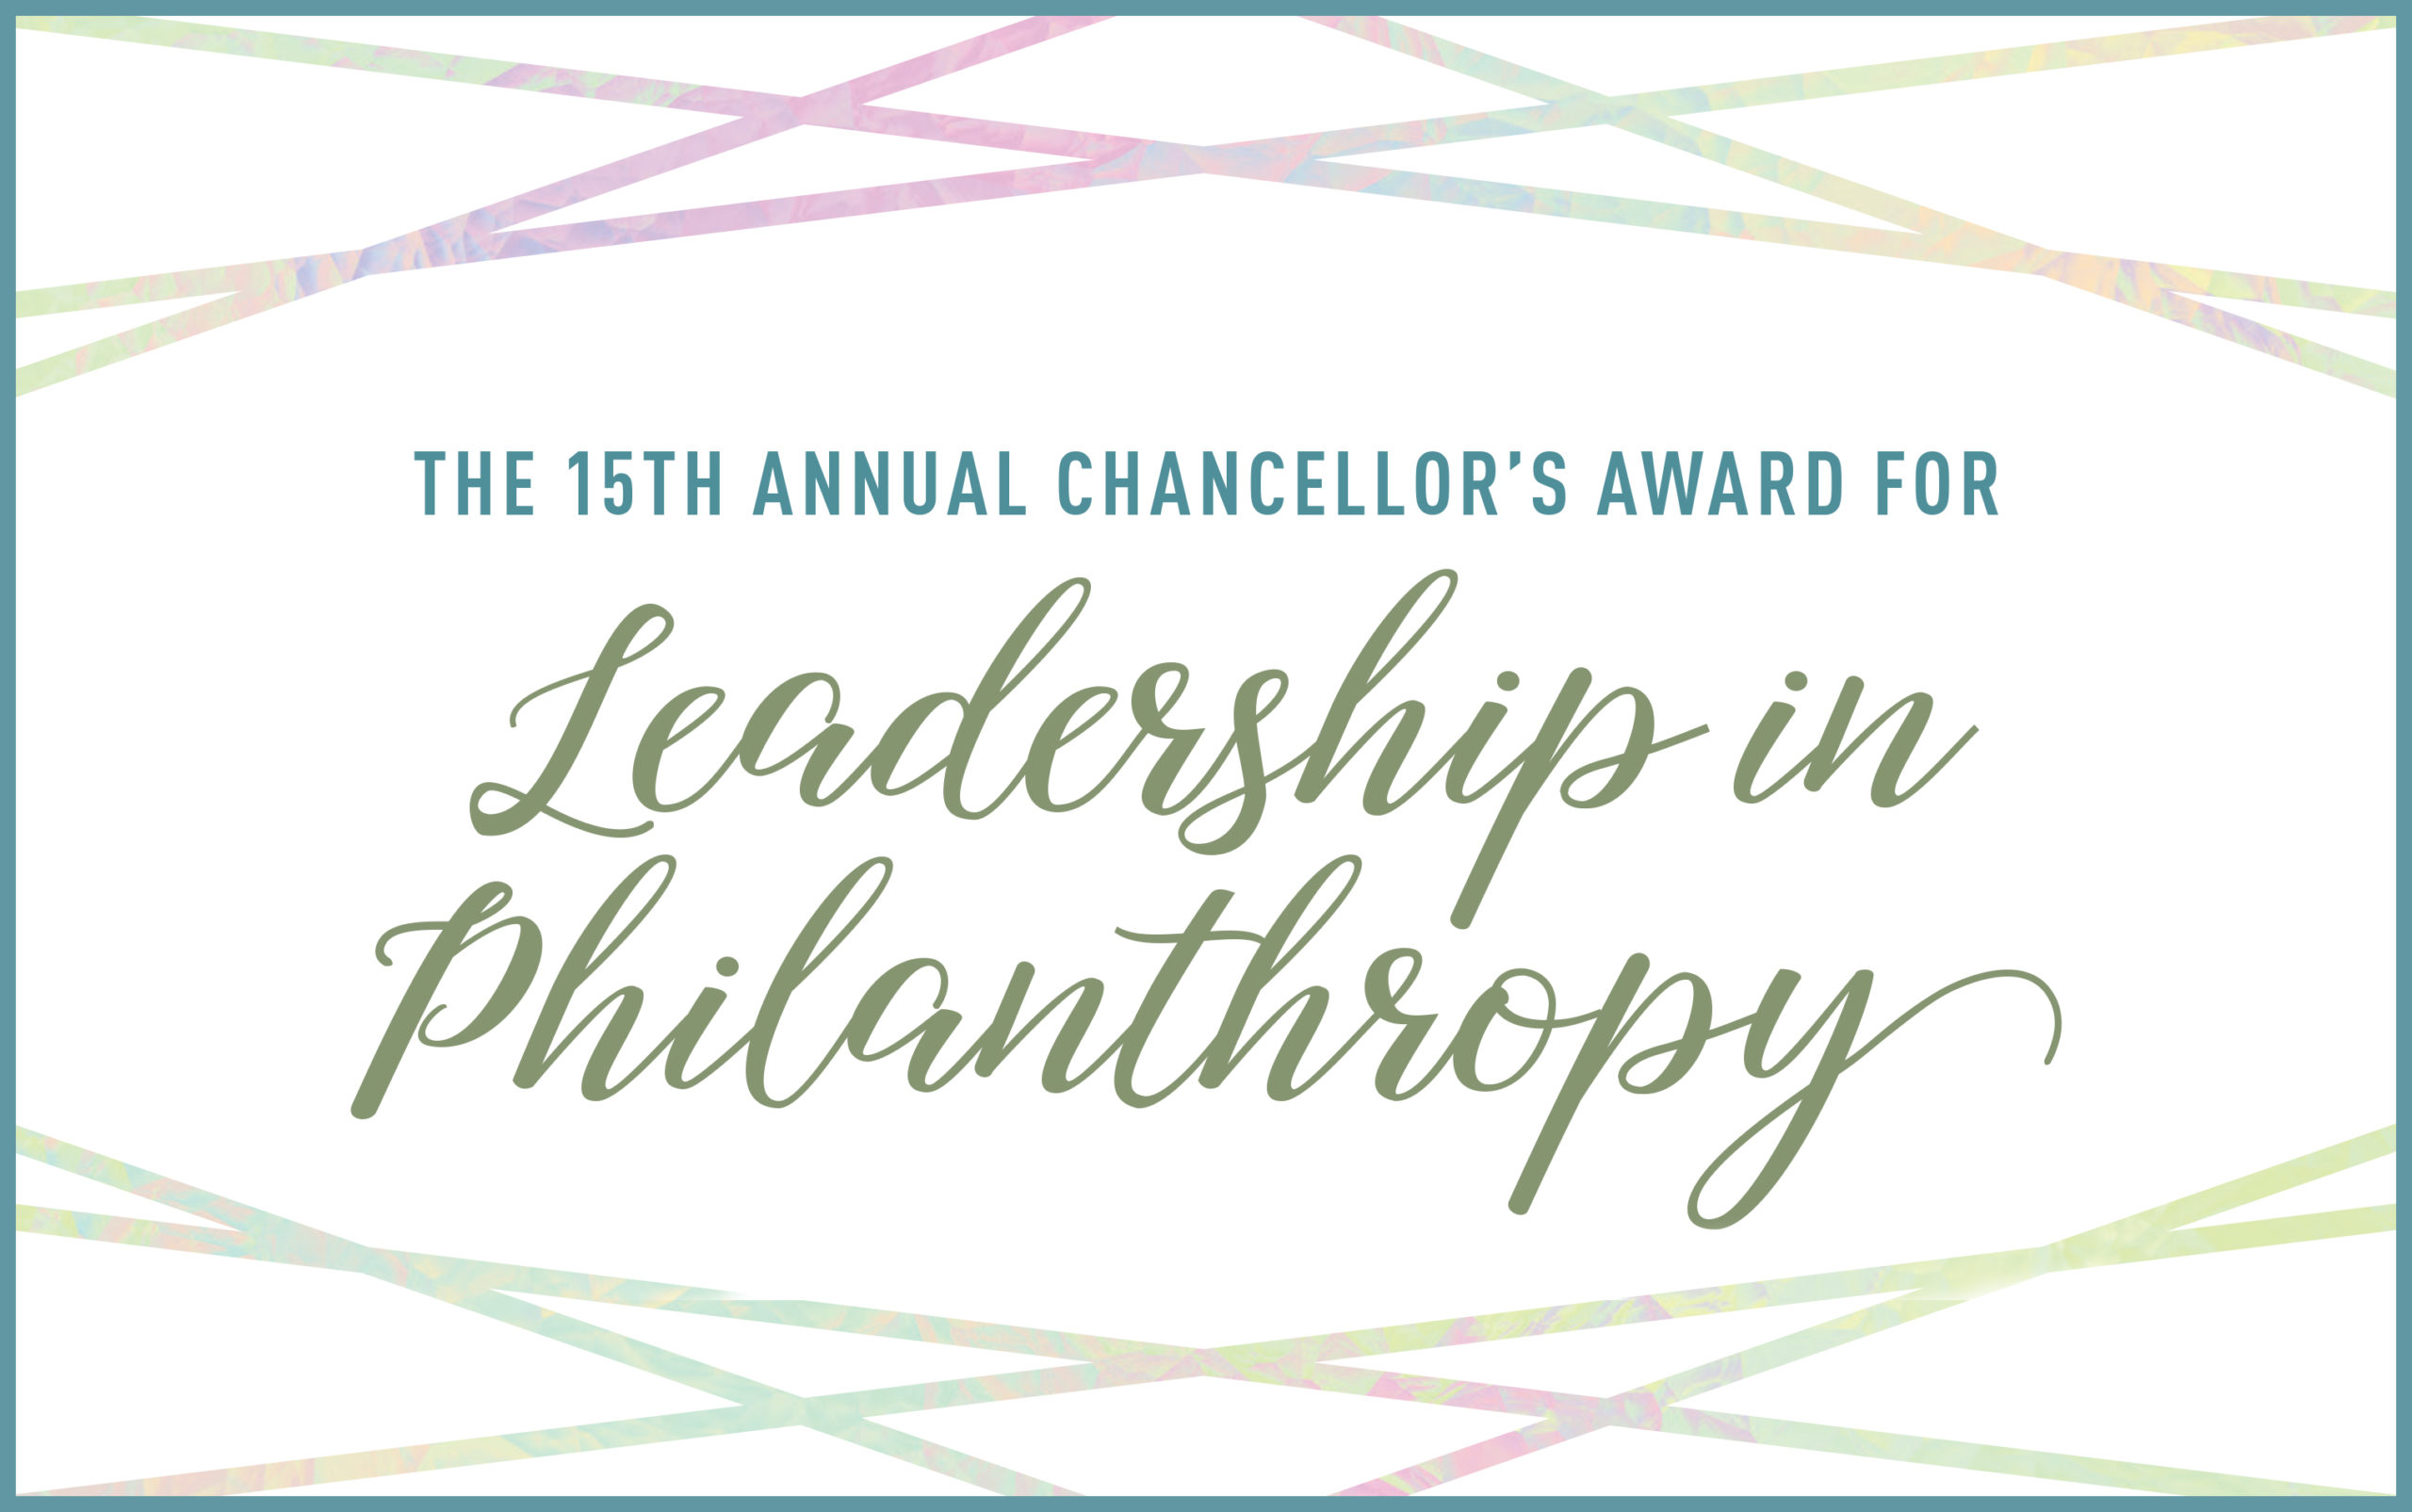 The 15th Annual Chancellor’s Award for Leadership in Philanthropy